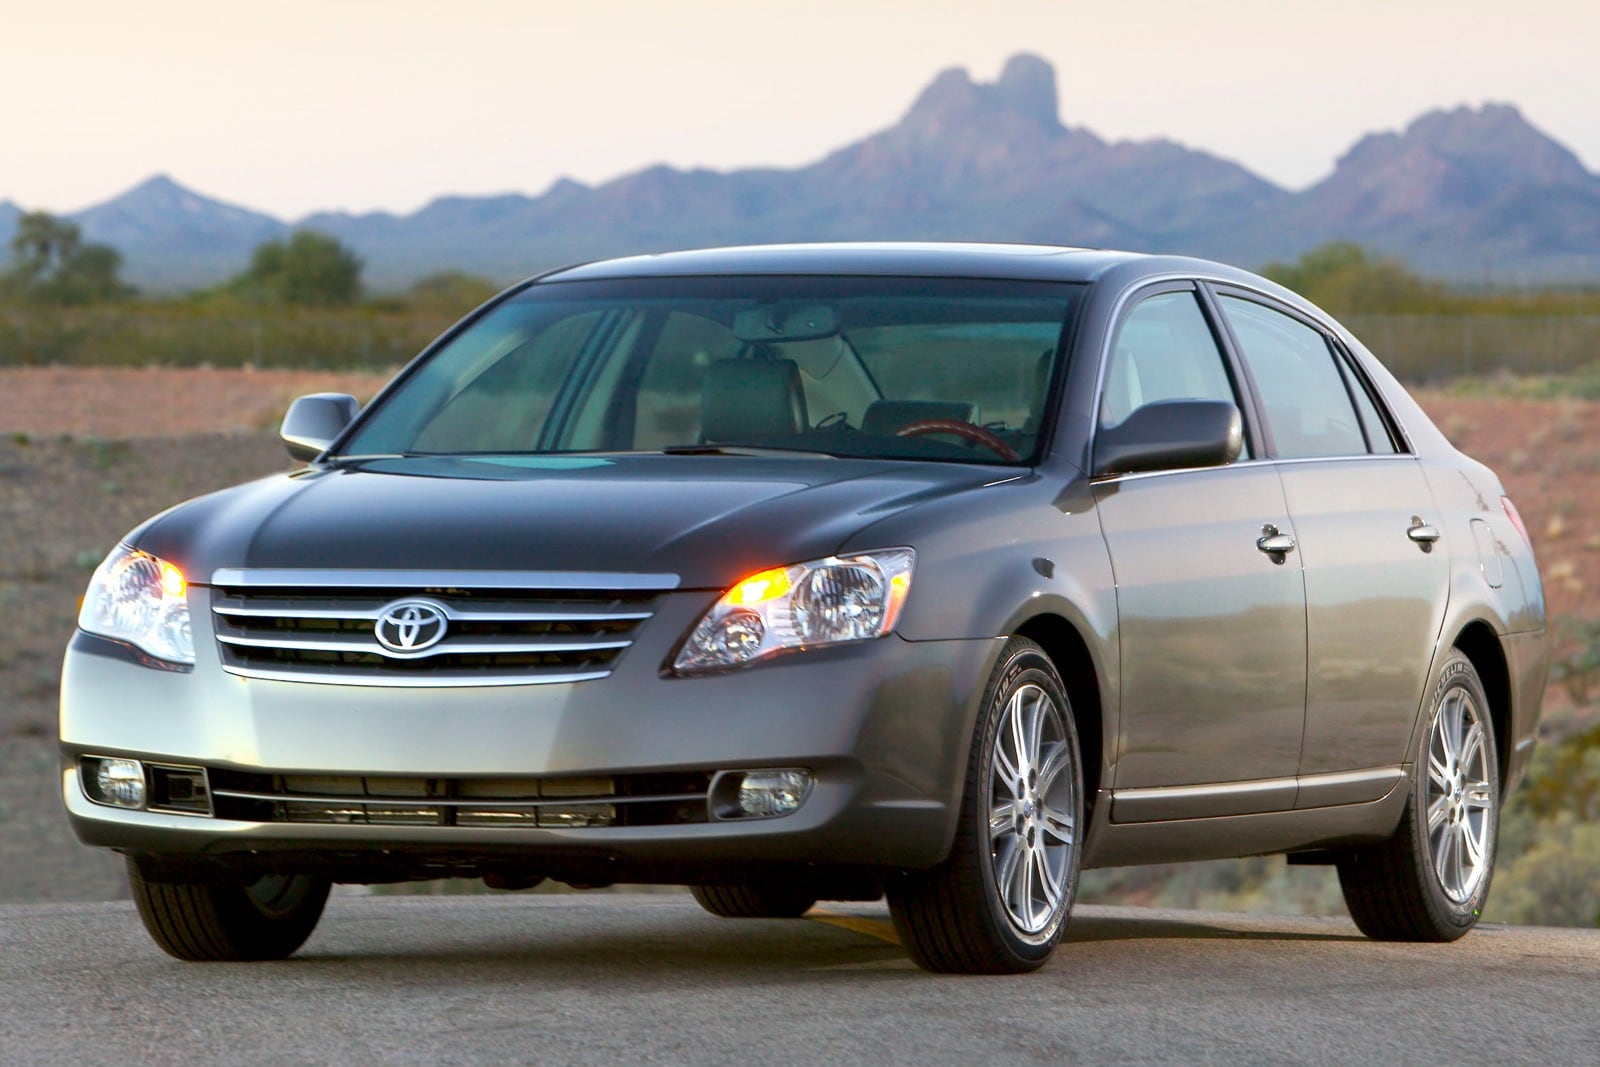 2007 Toyota Avalon Review & Ratings | Edmunds